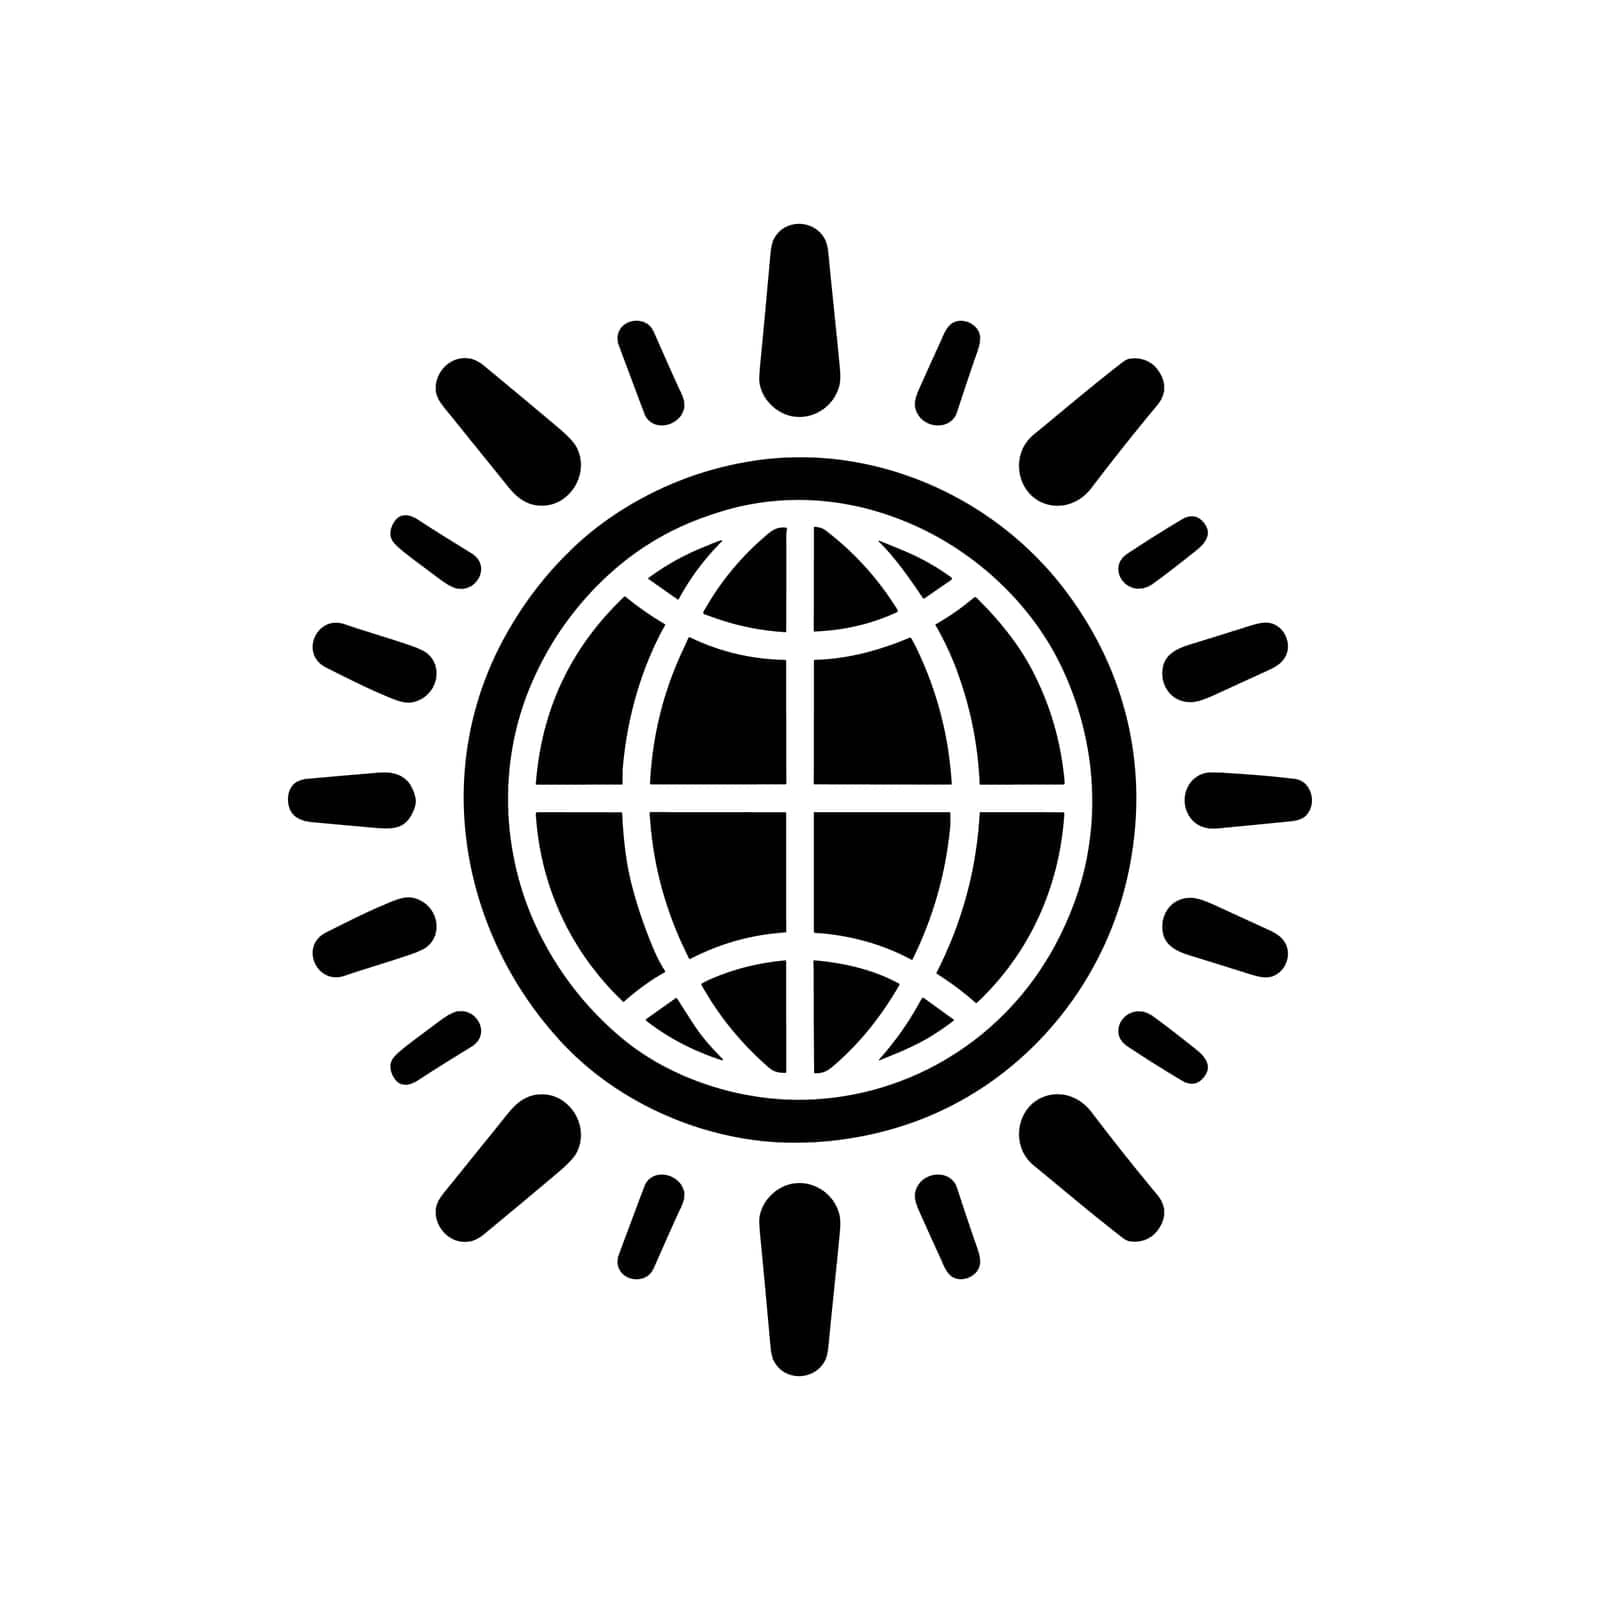 Black Globe icon with sun rays. Global warming or climate change concept. Globe icon. Vector illustration